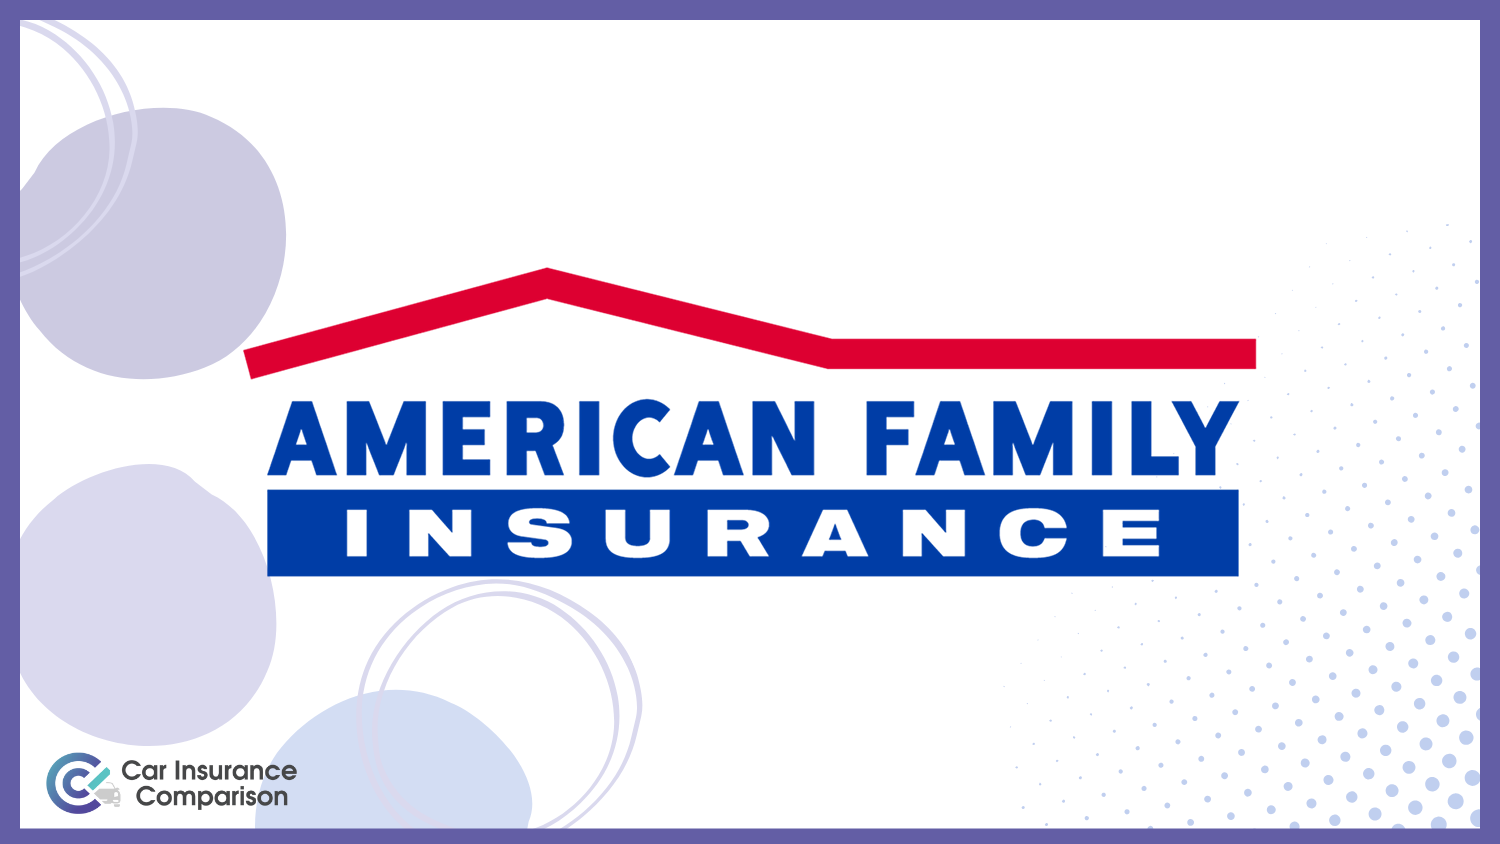 American Family: Best Eco-Friendly Car Insurance